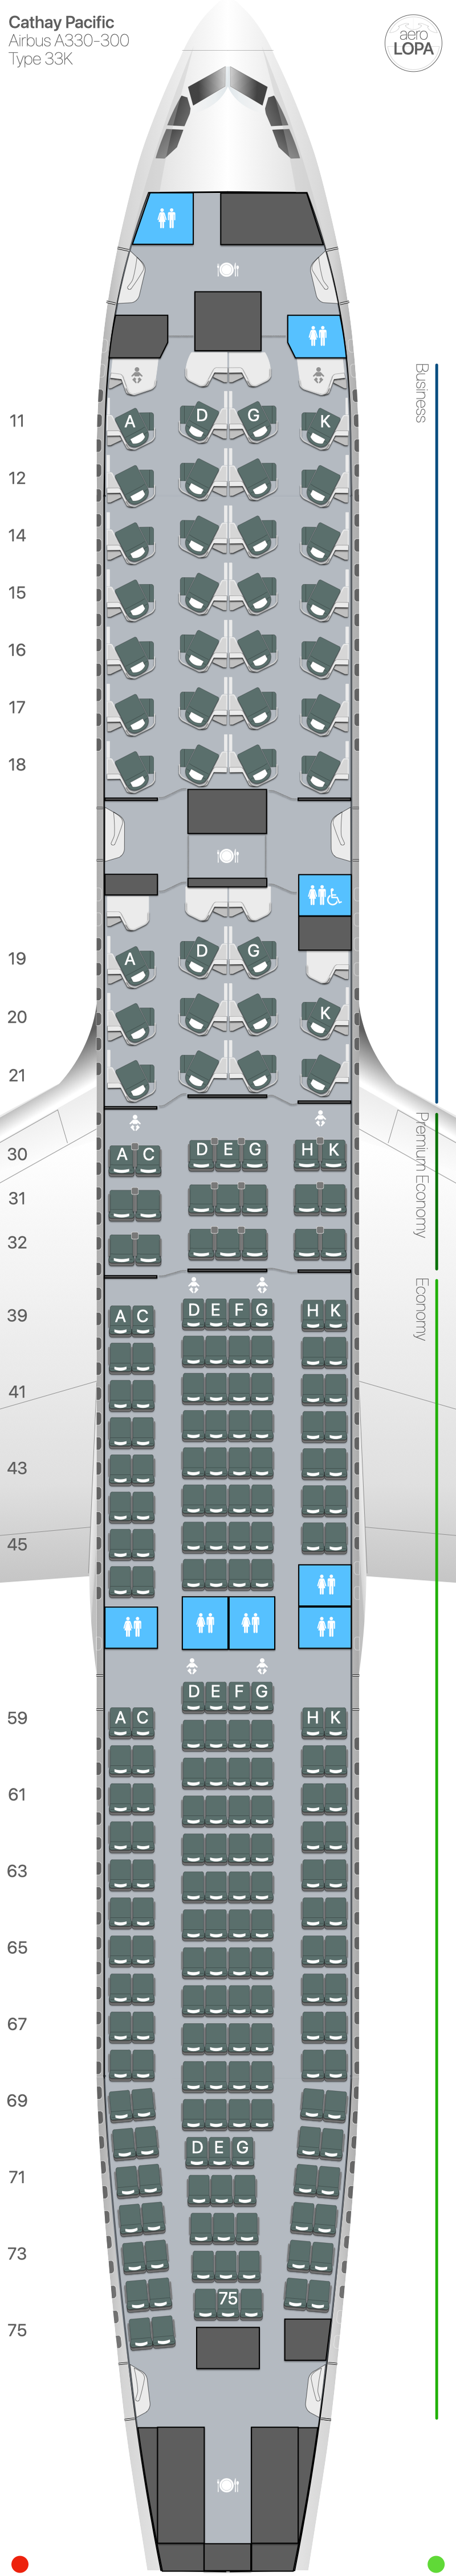 Cx Airbus A330 300 Type 33k Aerolopa Detailed Aircraft Seat Plans